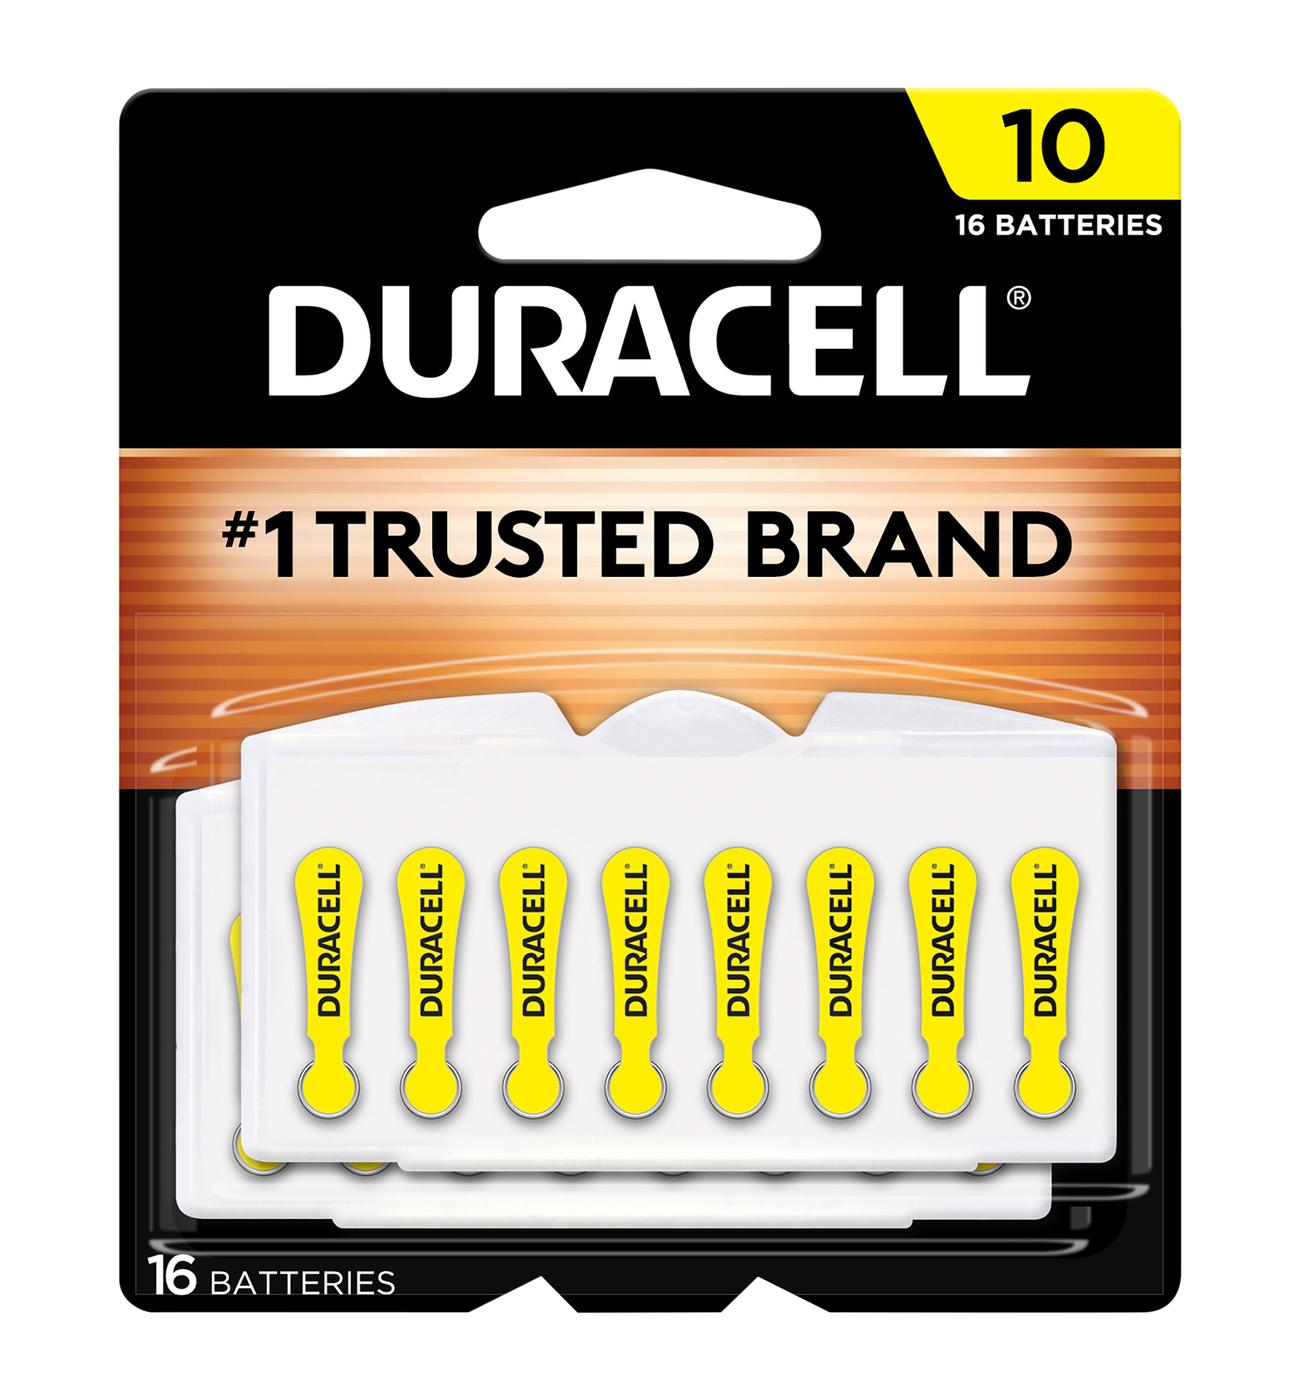 Duracell Size 10 Hearing Aid Batteries; image 1 of 2